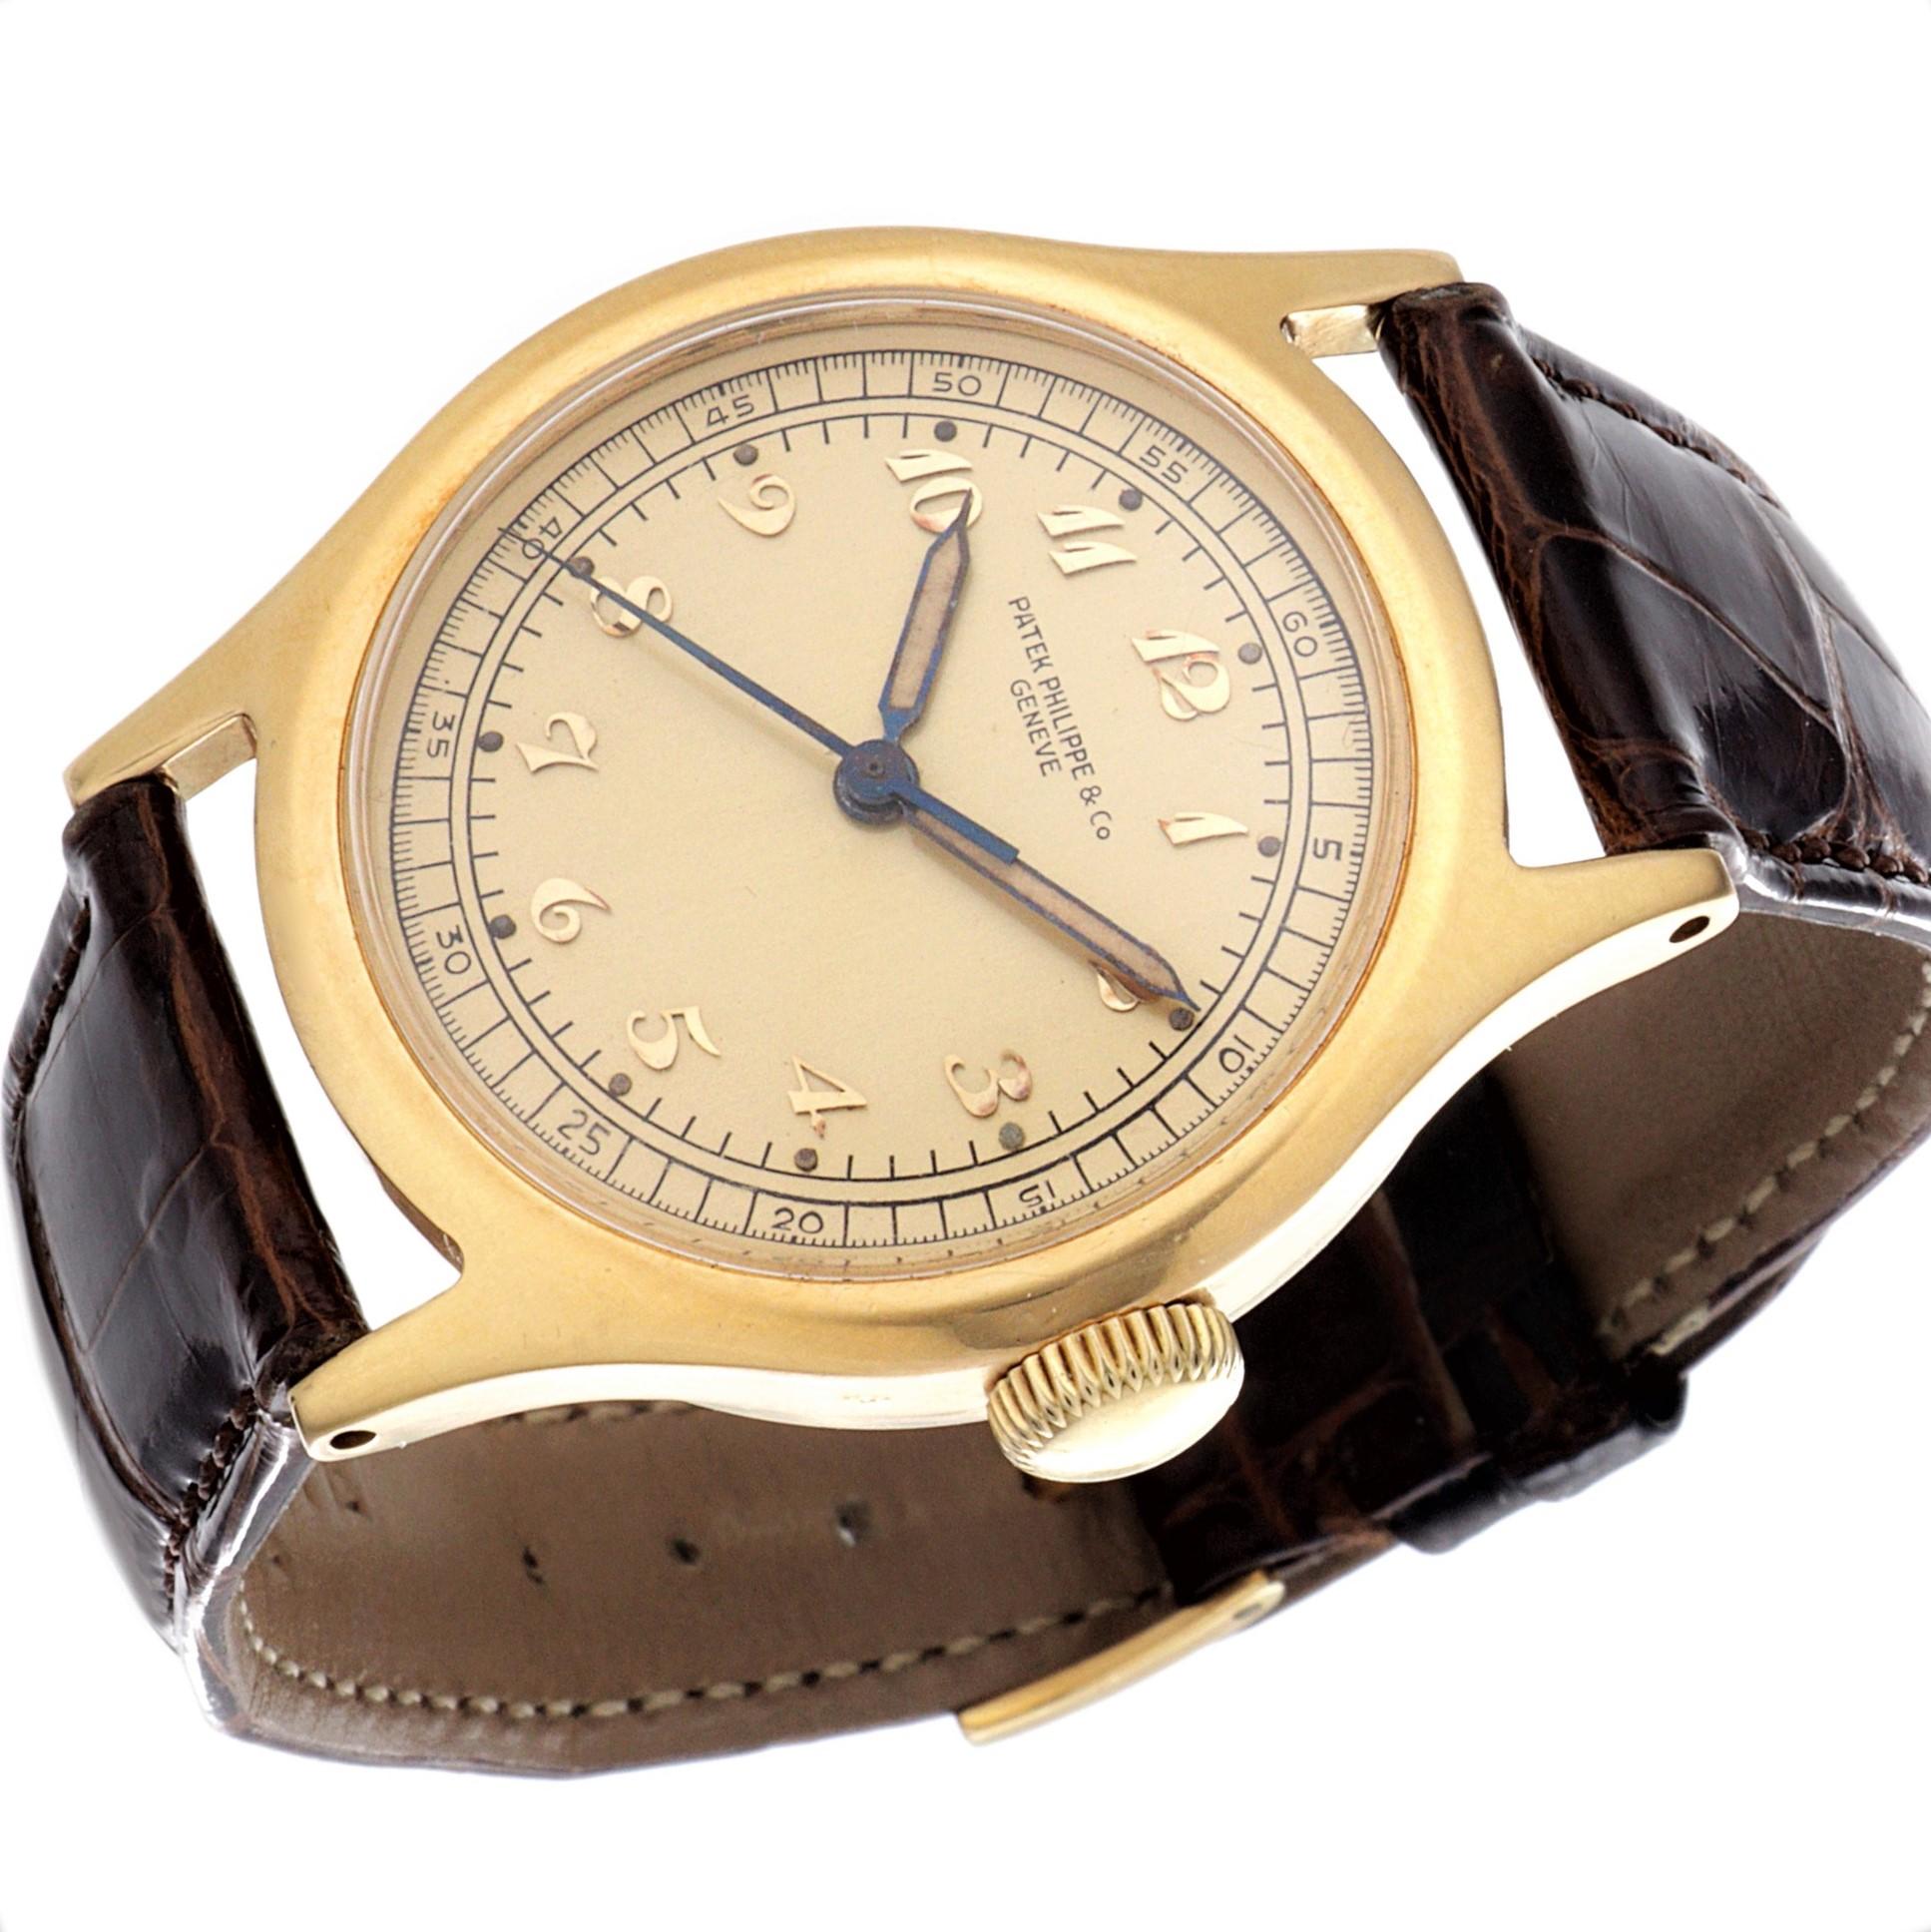 Introduction: ﻿

Patek Philippe 565J Vintage Calatrava measuring 35mm, water resistant screw down case.  The watch was made in 1942 and was fitted with a 12